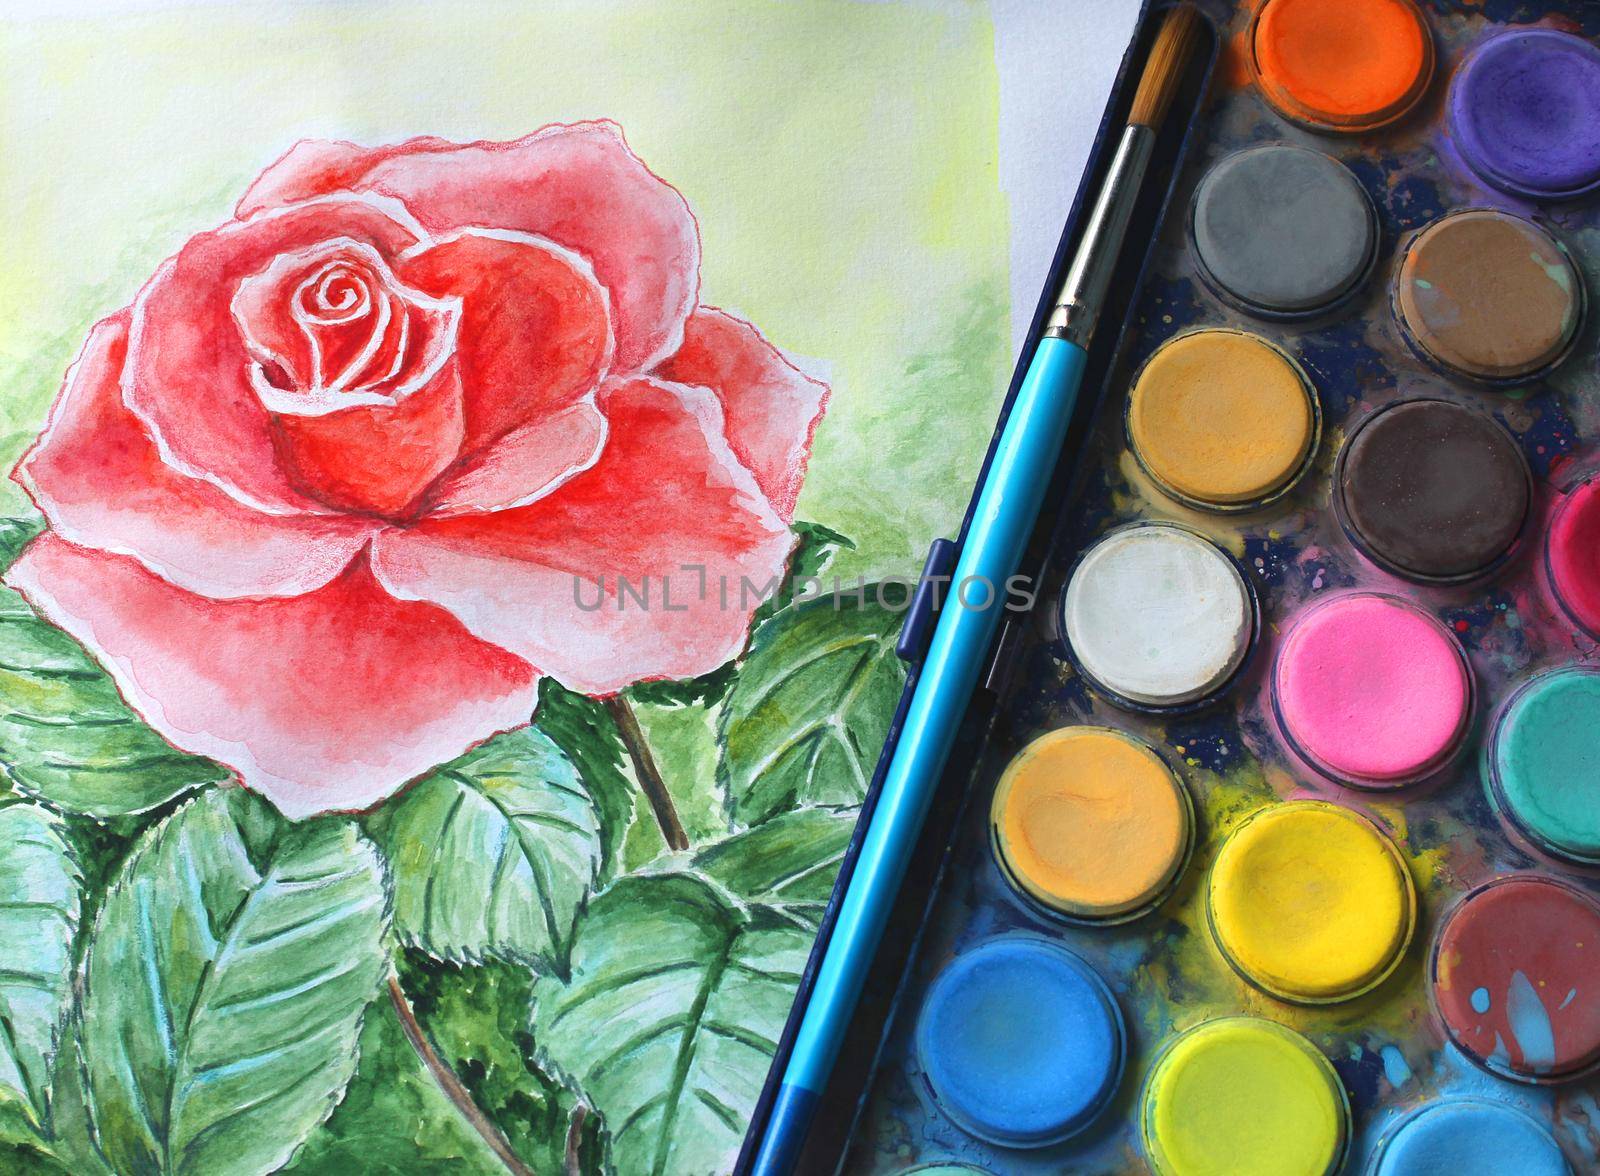 Roses, watercolor painting by JackyBrown